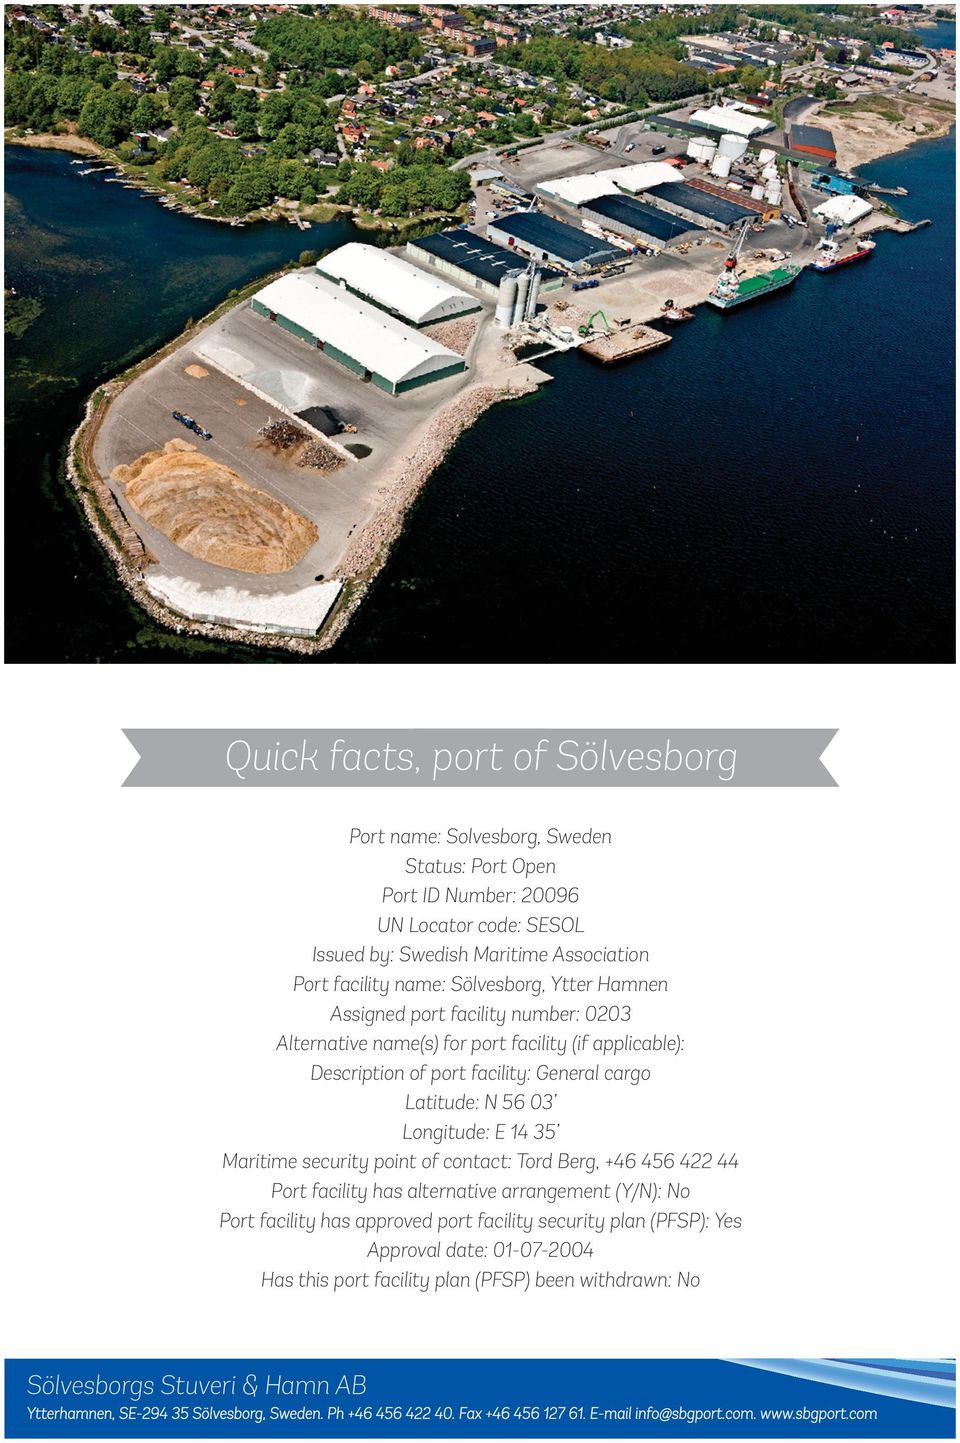 security point of contact: Tord Berg, +46 456 422 44 Port facility has alternative arrangement (Y/N): No Port facility has approved port facility security plan (PFSP): Yes Approval date: 01-07-2004